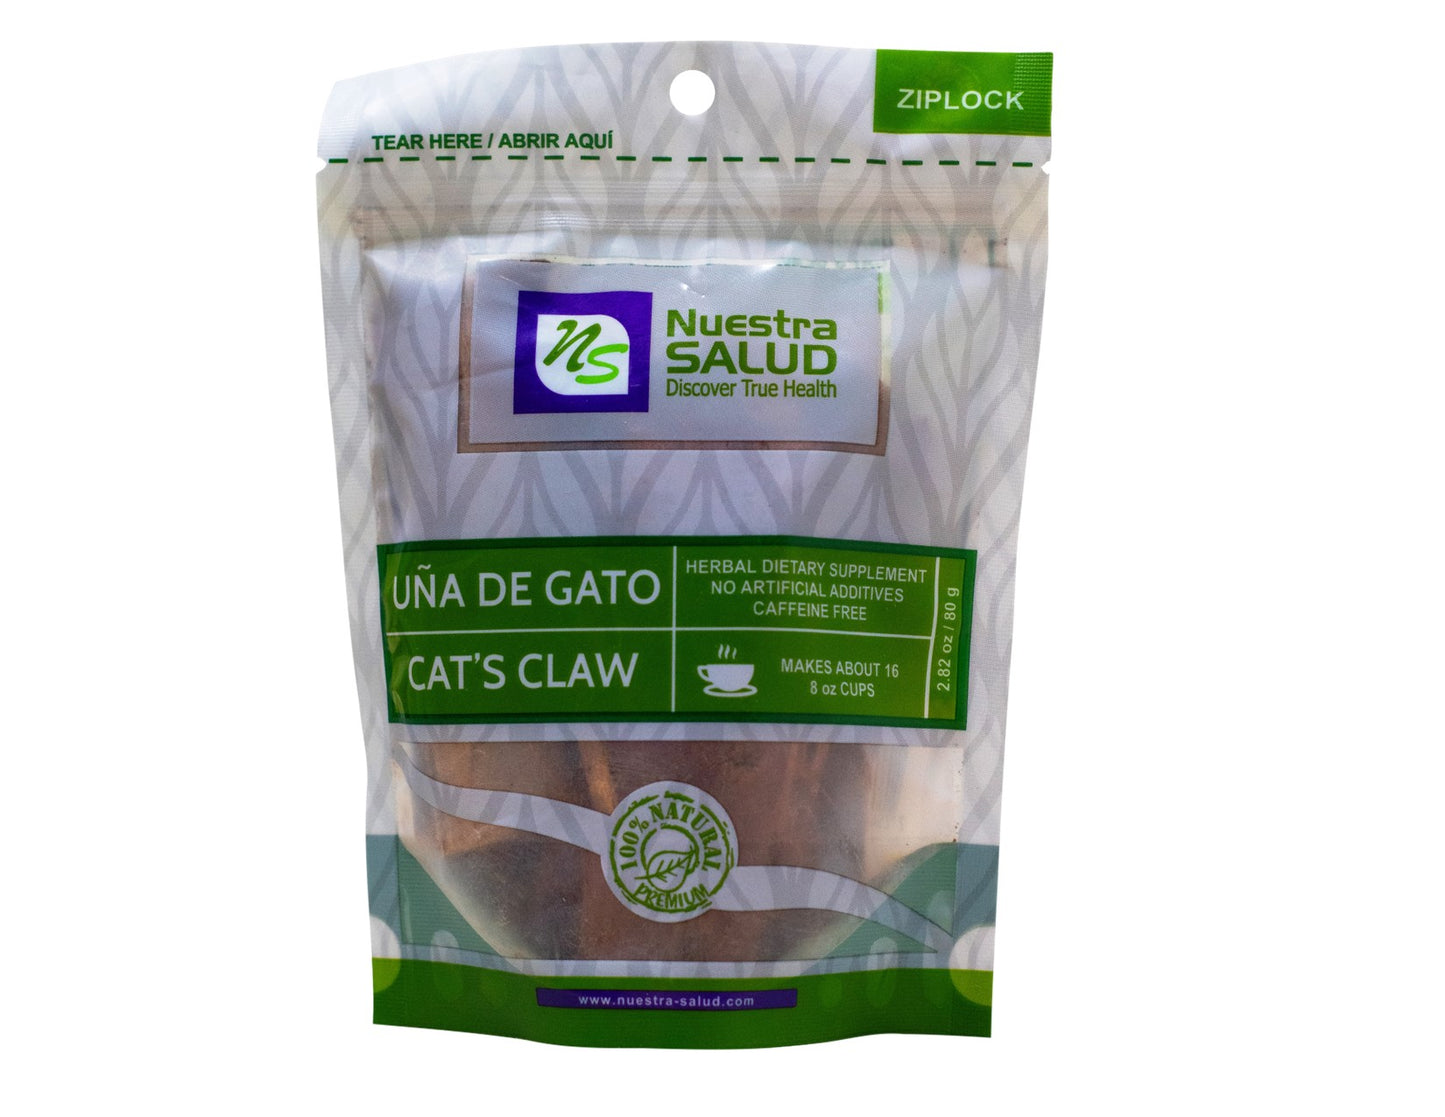  Uña De Gato Cats Claw Bark Herbal Infusion Tea Value Pack (240 grams) by Nuestra Salud sold by NS Herbs Co.